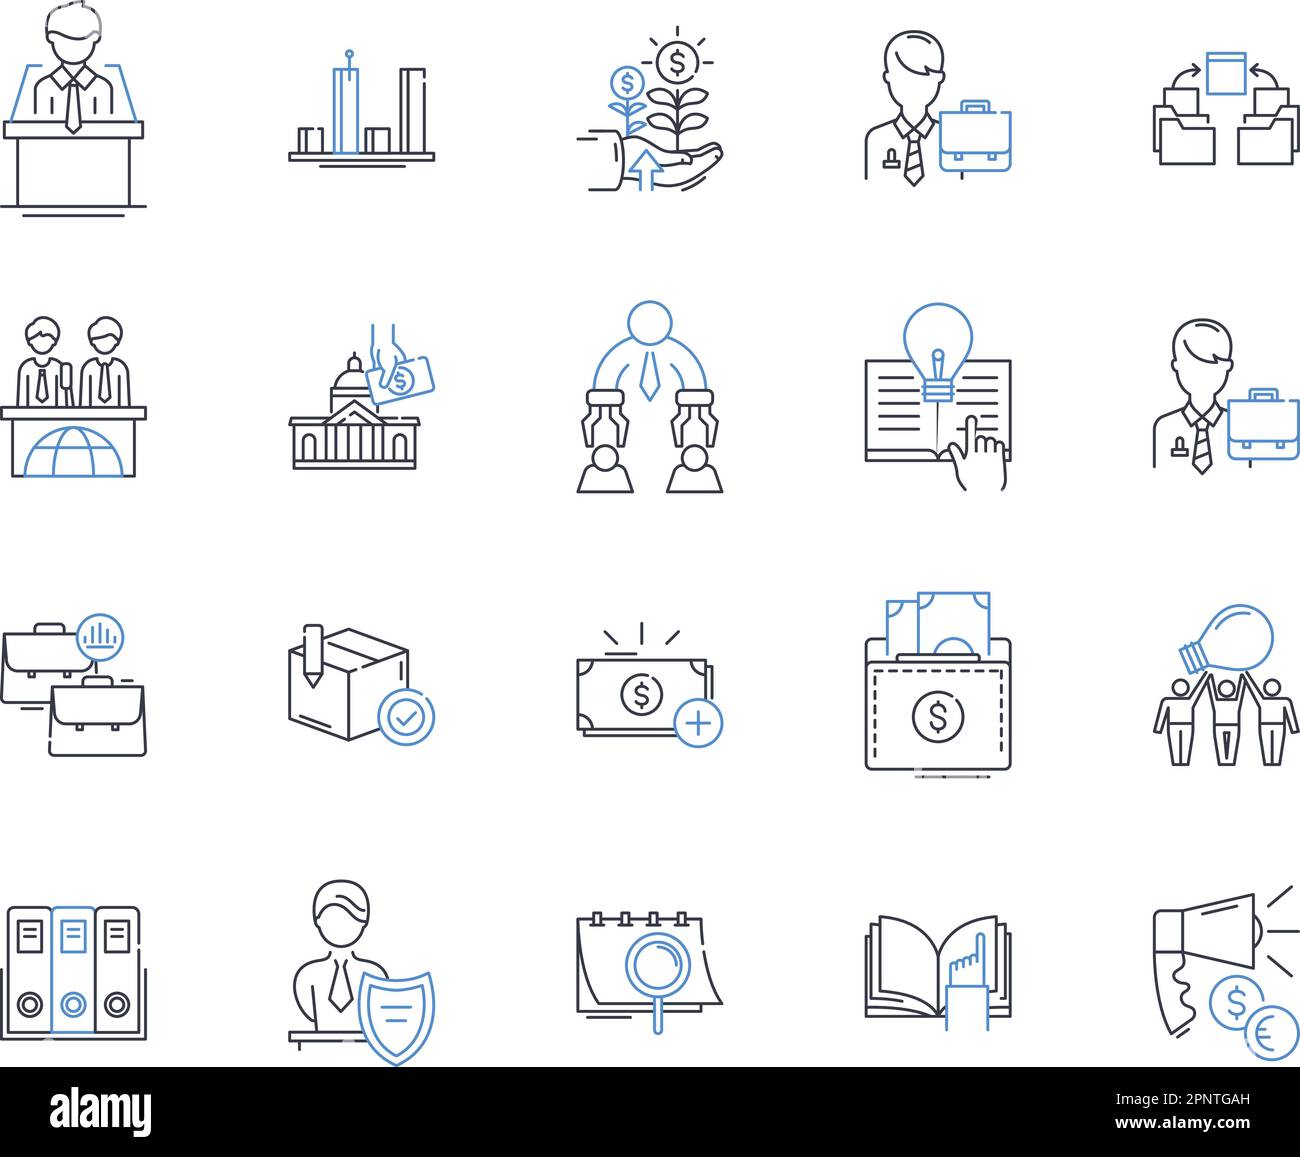 Tax optimization line icons collection. Deductions, Credits, Exemptions, Allowances, Depreciation, Losses, Minimization vector and linear illustration Stock Vector